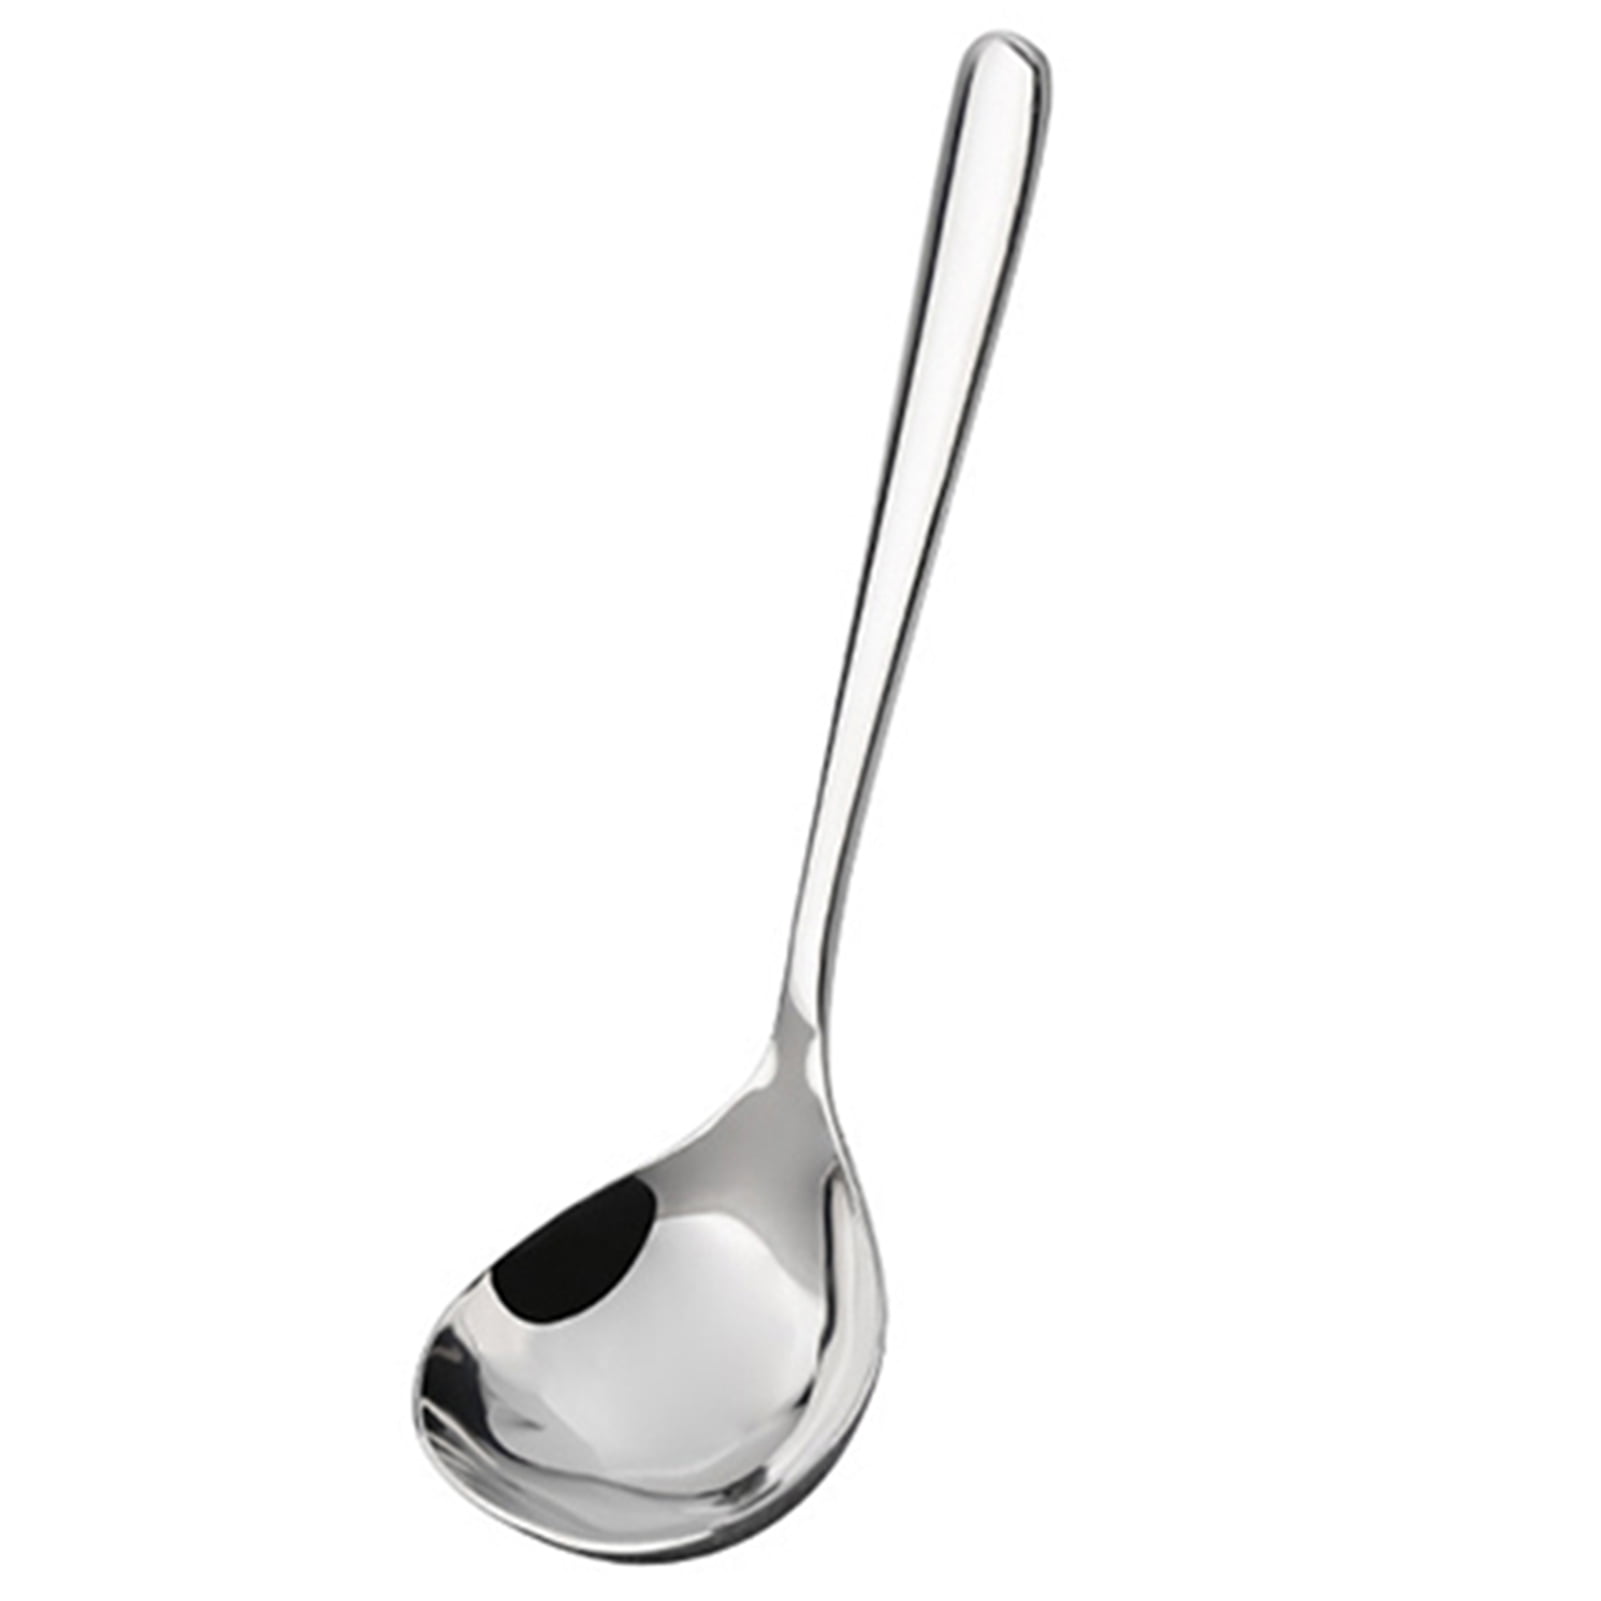 New Stainless Steel Lead Ladle Spoon Fishing Woulds For Weights Making Cheap 